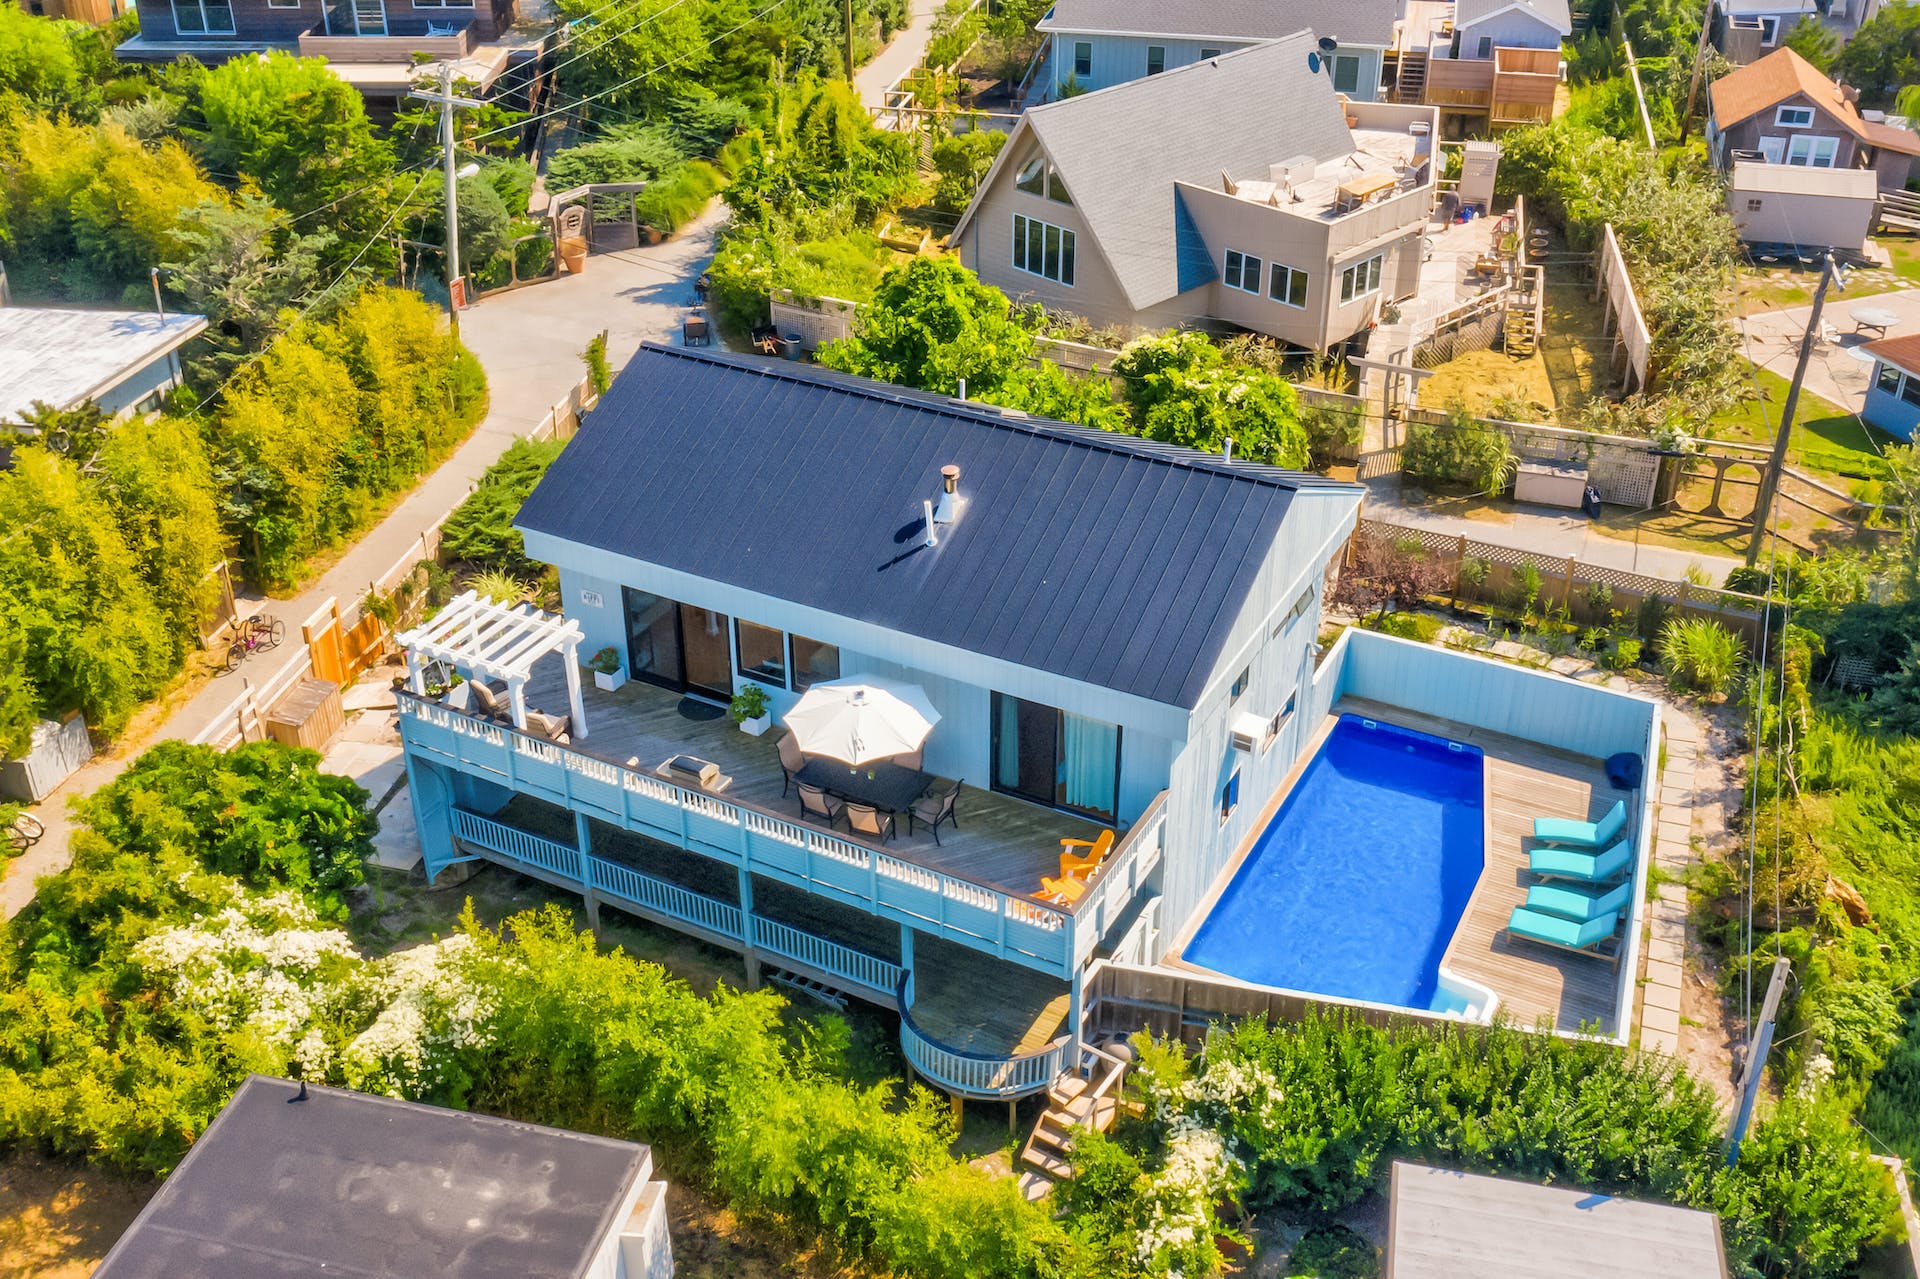 This is a rare find in one of Fire Island’s most desirable neighborhoods. Nestled between Ocean Beach and Ocean Bay Park, this massive Seaview home features a coastal-themed decor. Experience the most breathtaking unobstructed views of the bay from the 2nd story deck. These forever views are guaranteed by the indefinite no-build easement on the property north of this lot. Once you’re done enjoying the bay breeze, step through the 2nd story sliding doors to the open living area. With soaring ceilings and massive windows, light floods the second story with natural light.  The updated kitchen features stainless steel appliances, including a 6-burner gas oven, 42" hardwood cabinets, travertine floors, countertops with penny-round tiles, and a lovely seating area. The living room is home to a cozy wood-burning fireplace, window seats with additional storage, and beautiful custom built-ins. Additionally, there is a master bedroom with an ensuite bathroom and two double closets with sliding glass doors that lead to the deck. When you walk down the spiral staircase you’re greeted by 3 generously sized bedrooms, two of which lead out to the 1st-floor deck. The 1st floor also has 2 full bathrooms and a laundry room. While you’re not at the beach, a mere few blocks away, enjoy the privacy of your own fenced-in pool adjacent to the large first-floor deck. Enjoy this beach home all to yourself or take advantage of the HUGE investment potential in the luxury vacation rental market with a rent roll of $15,000 per week during the summer.  Residents of Seaview have access to the private Seaview bay front park, tennis courts and baseball field.